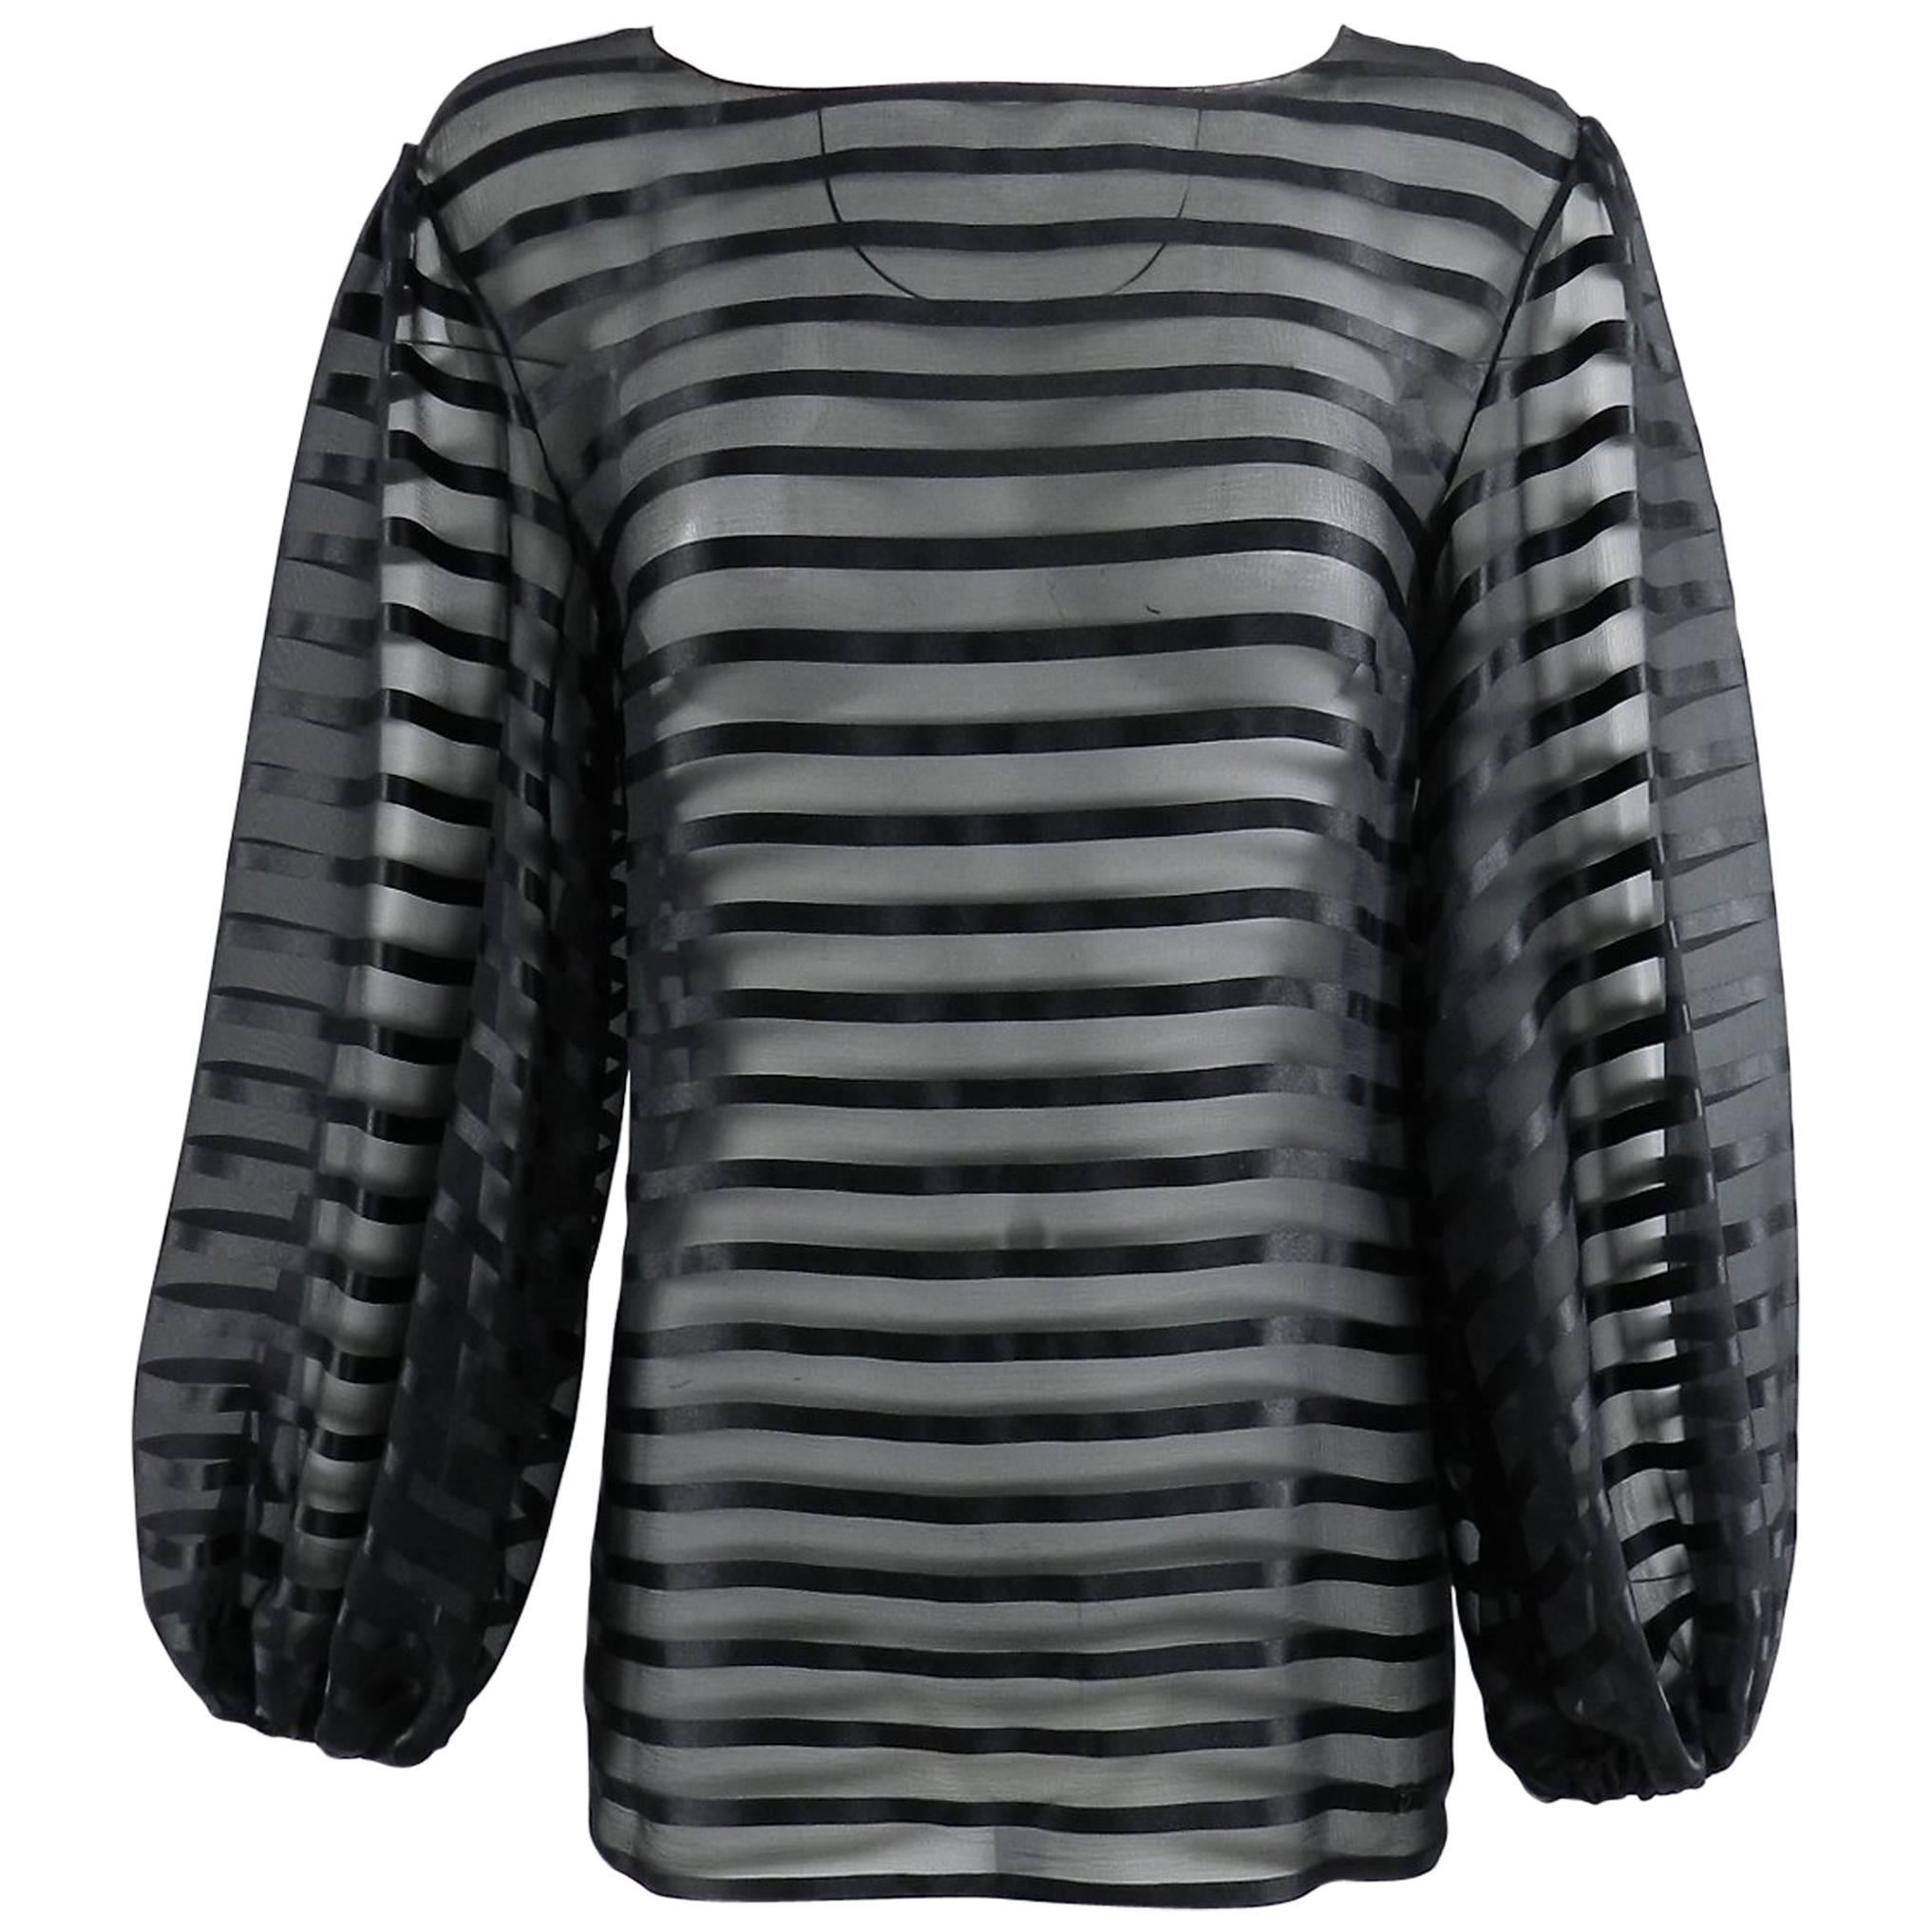 Chanel Sheer black striped blouse with full sleeves